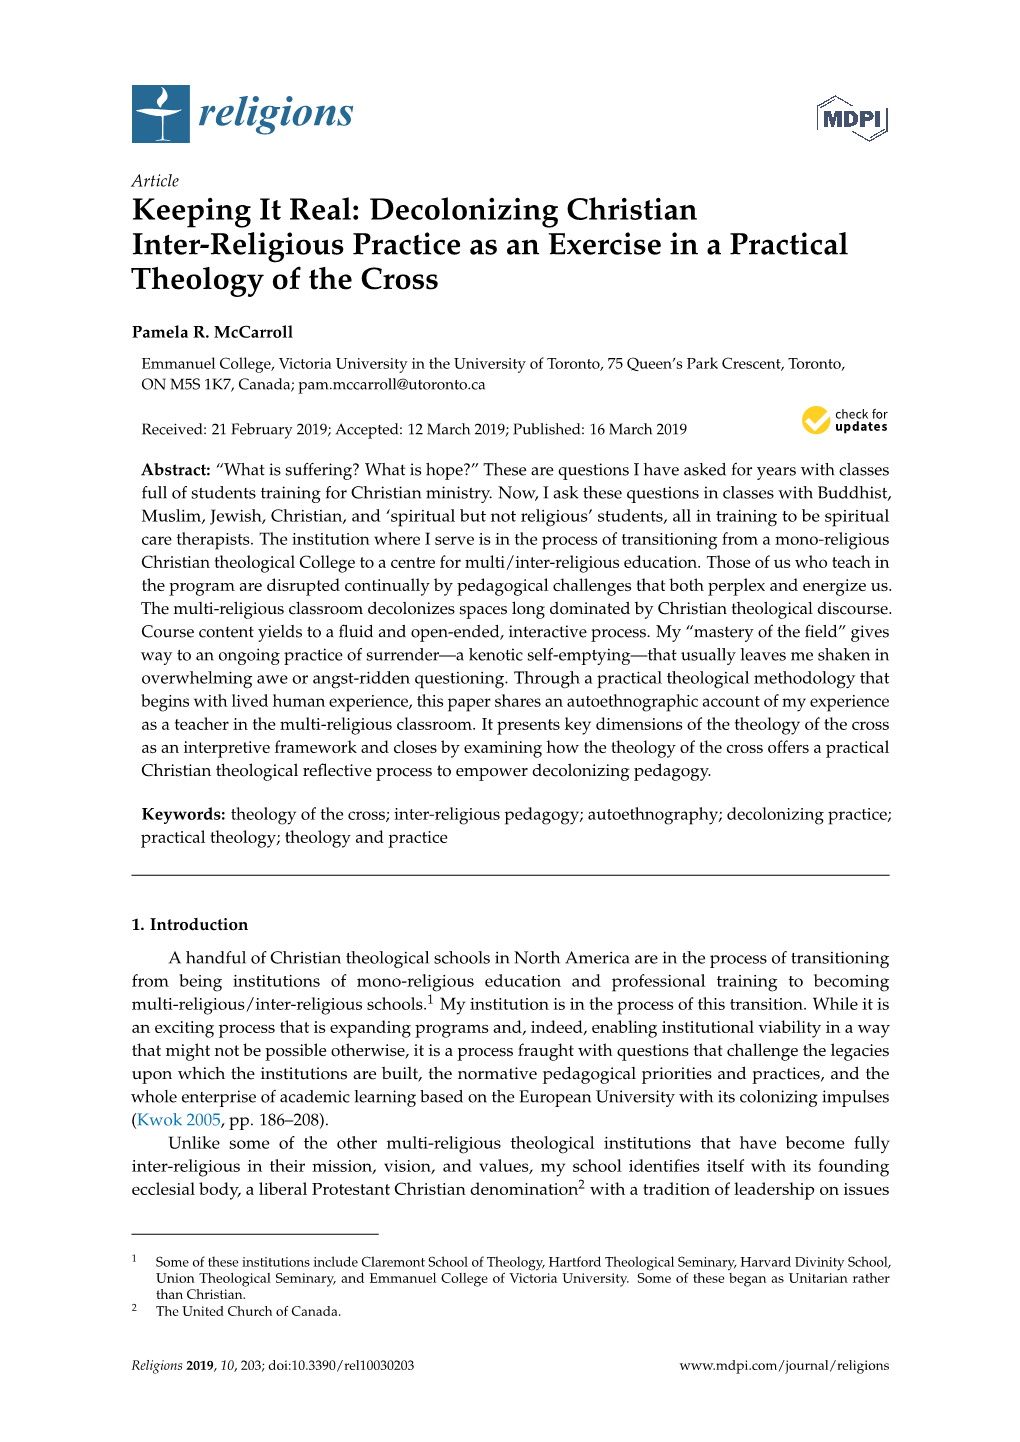 Decolonizing Christian Inter-Religious Practice As an Exercise in a Practical Theology of the Cross